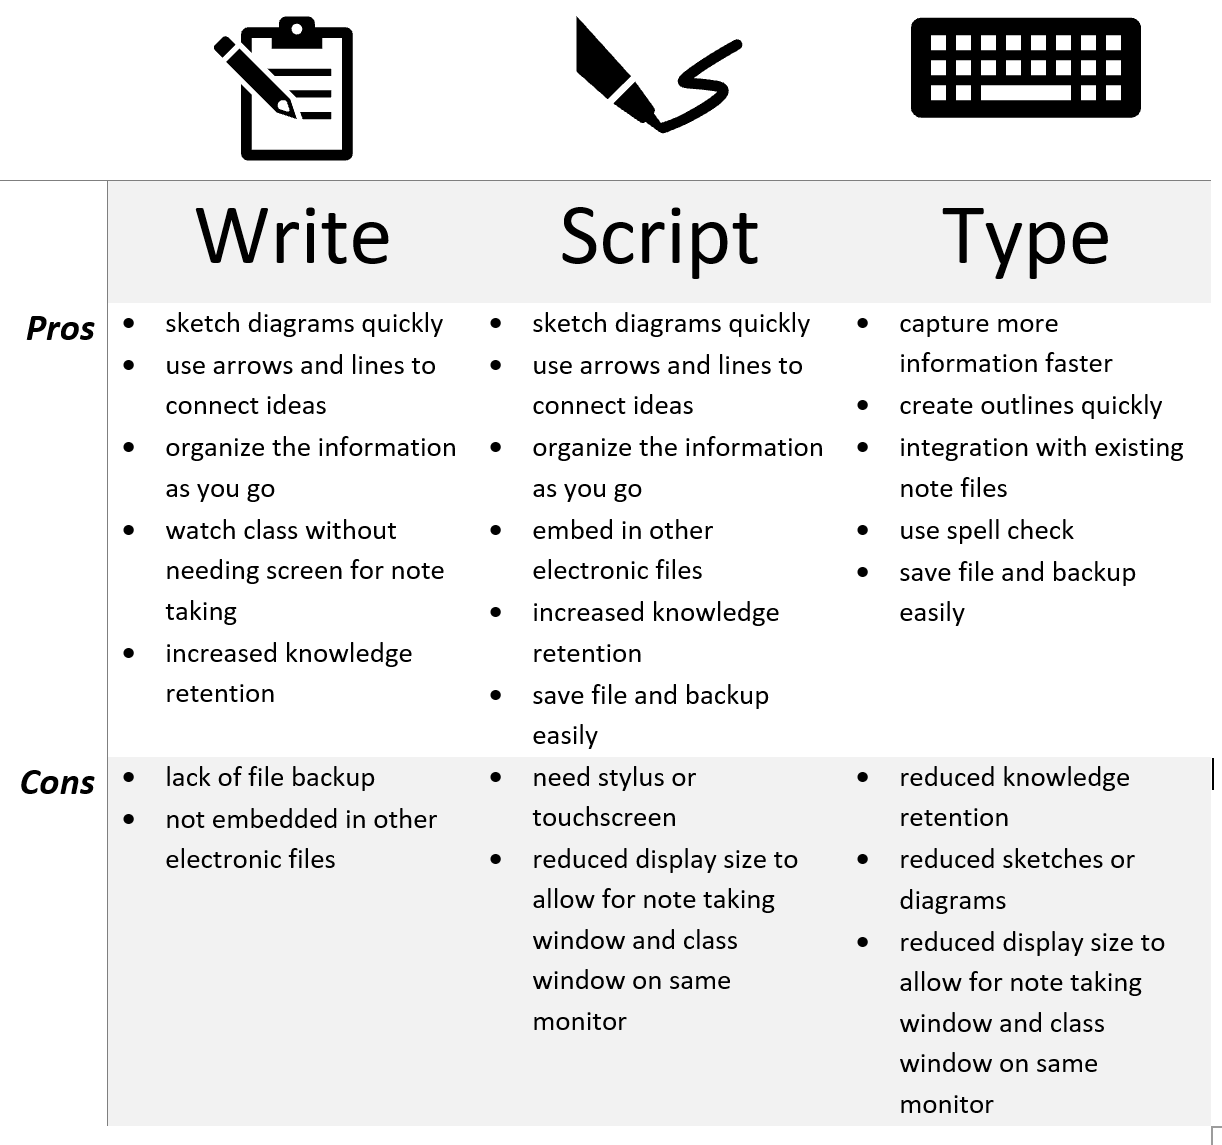 Note Taking: Pros and Cons of Write, Script and Type